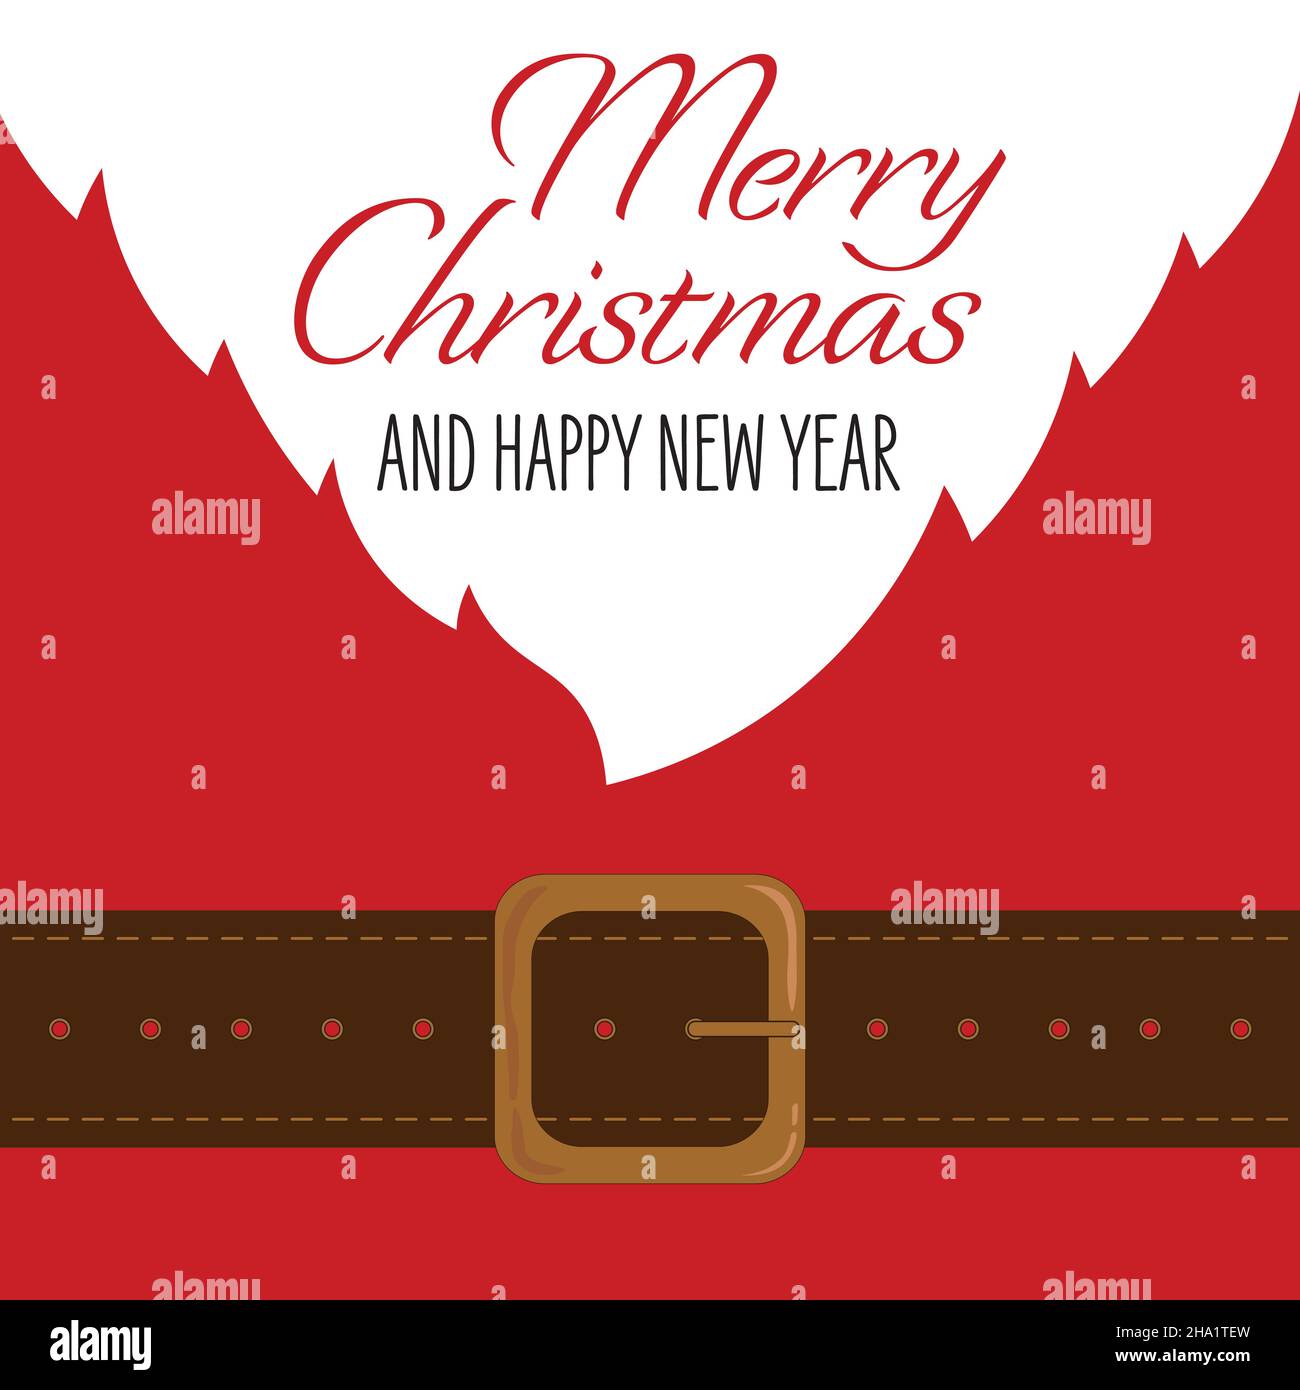 Merry Christmas and Happy New Year - Santa Claus Background Stock Vector